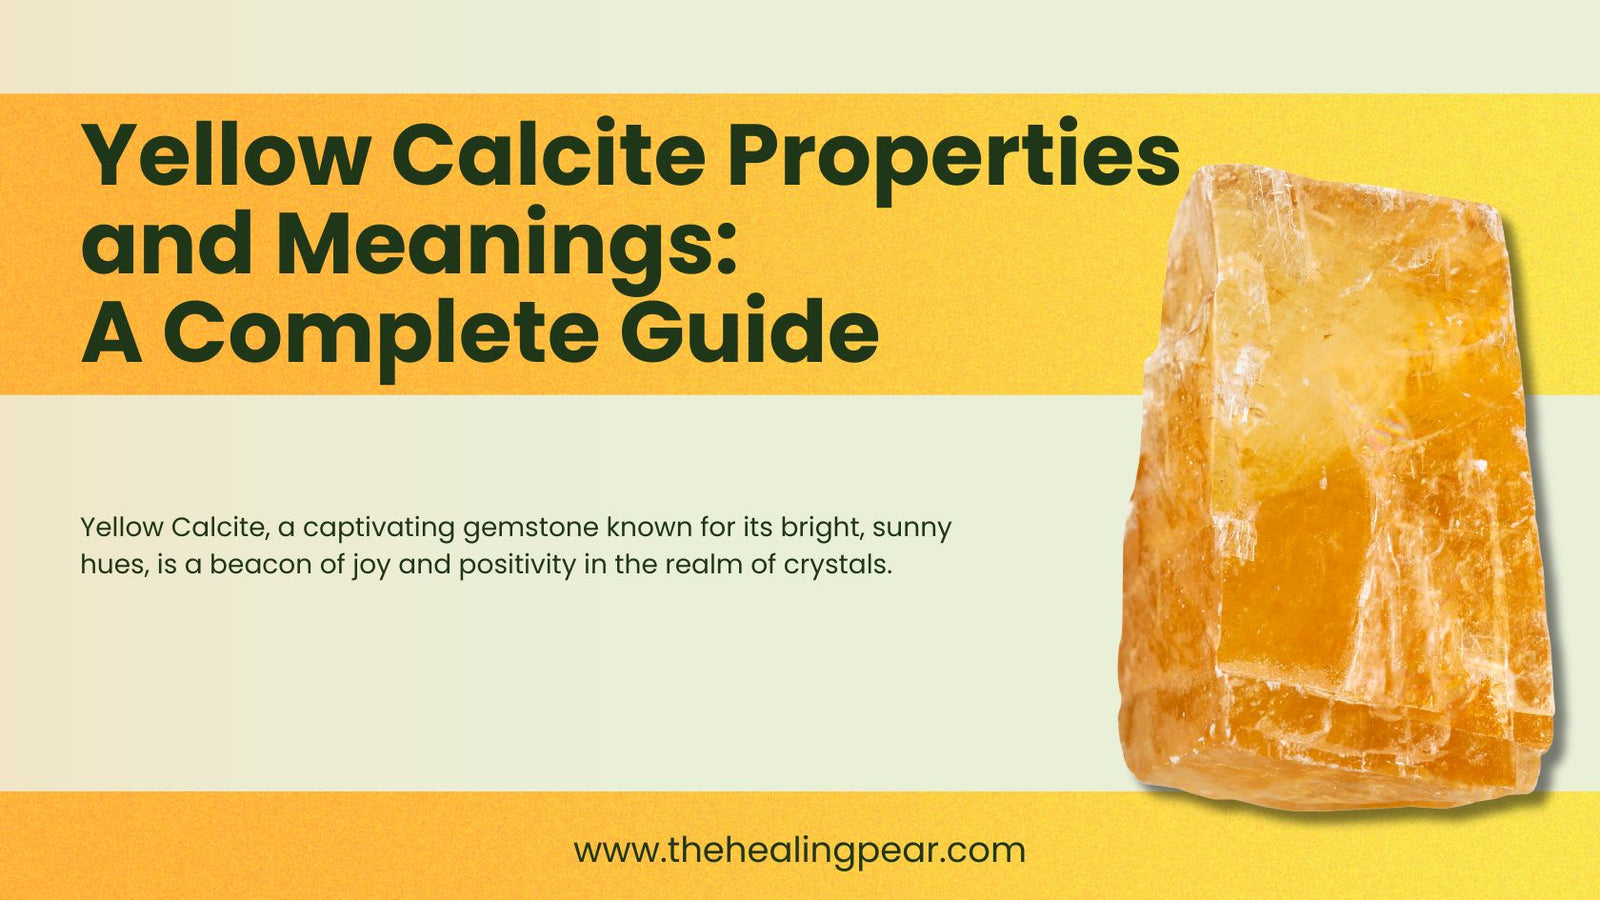 Yellow Calcite Properties and Meanings: A Complete Guide